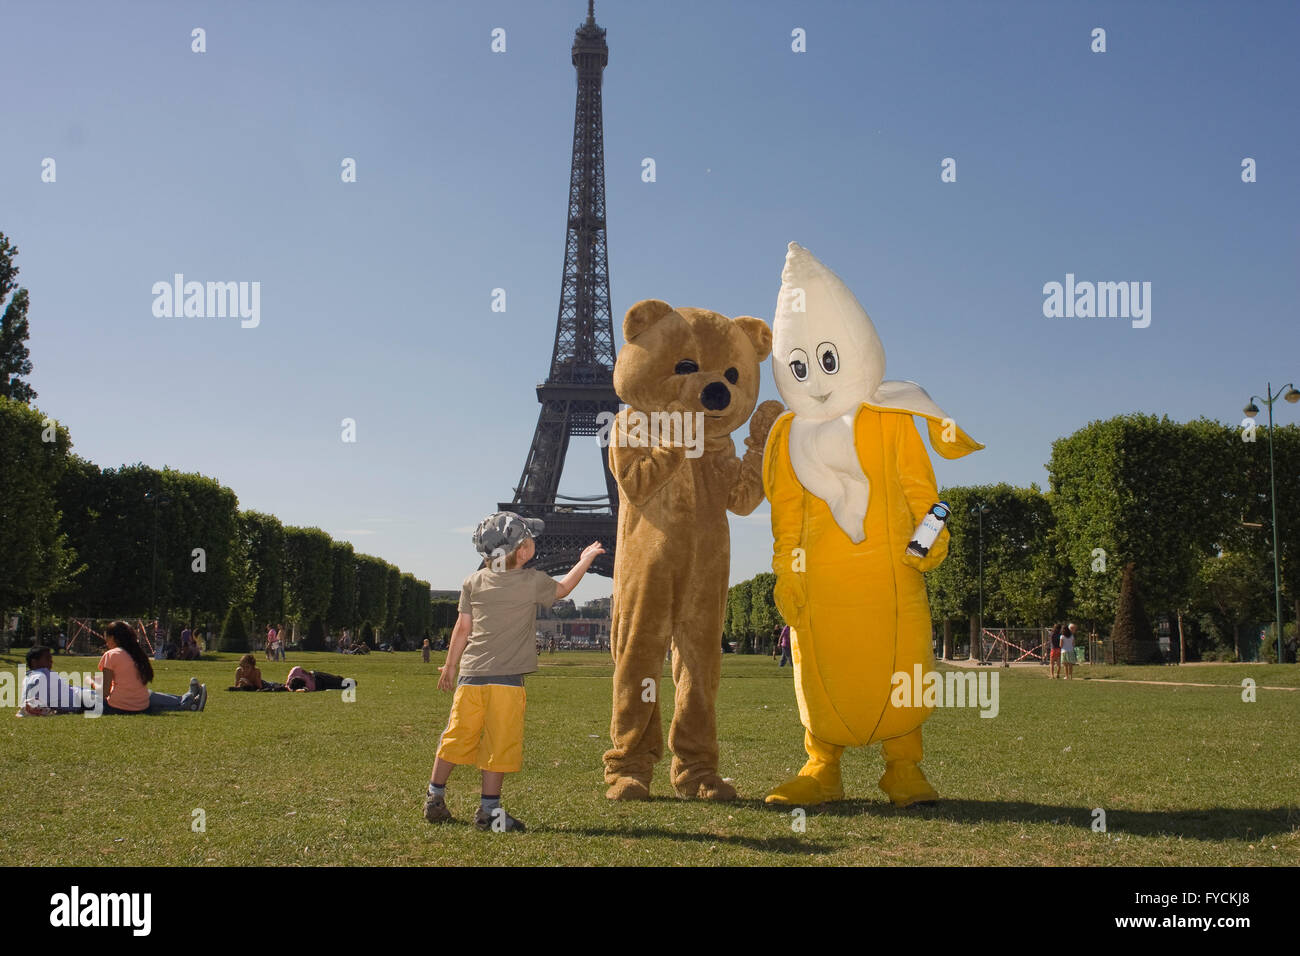 Children get attraction of a couple who wearing a fancy dress in The Eiffel Tower. Stock Photo